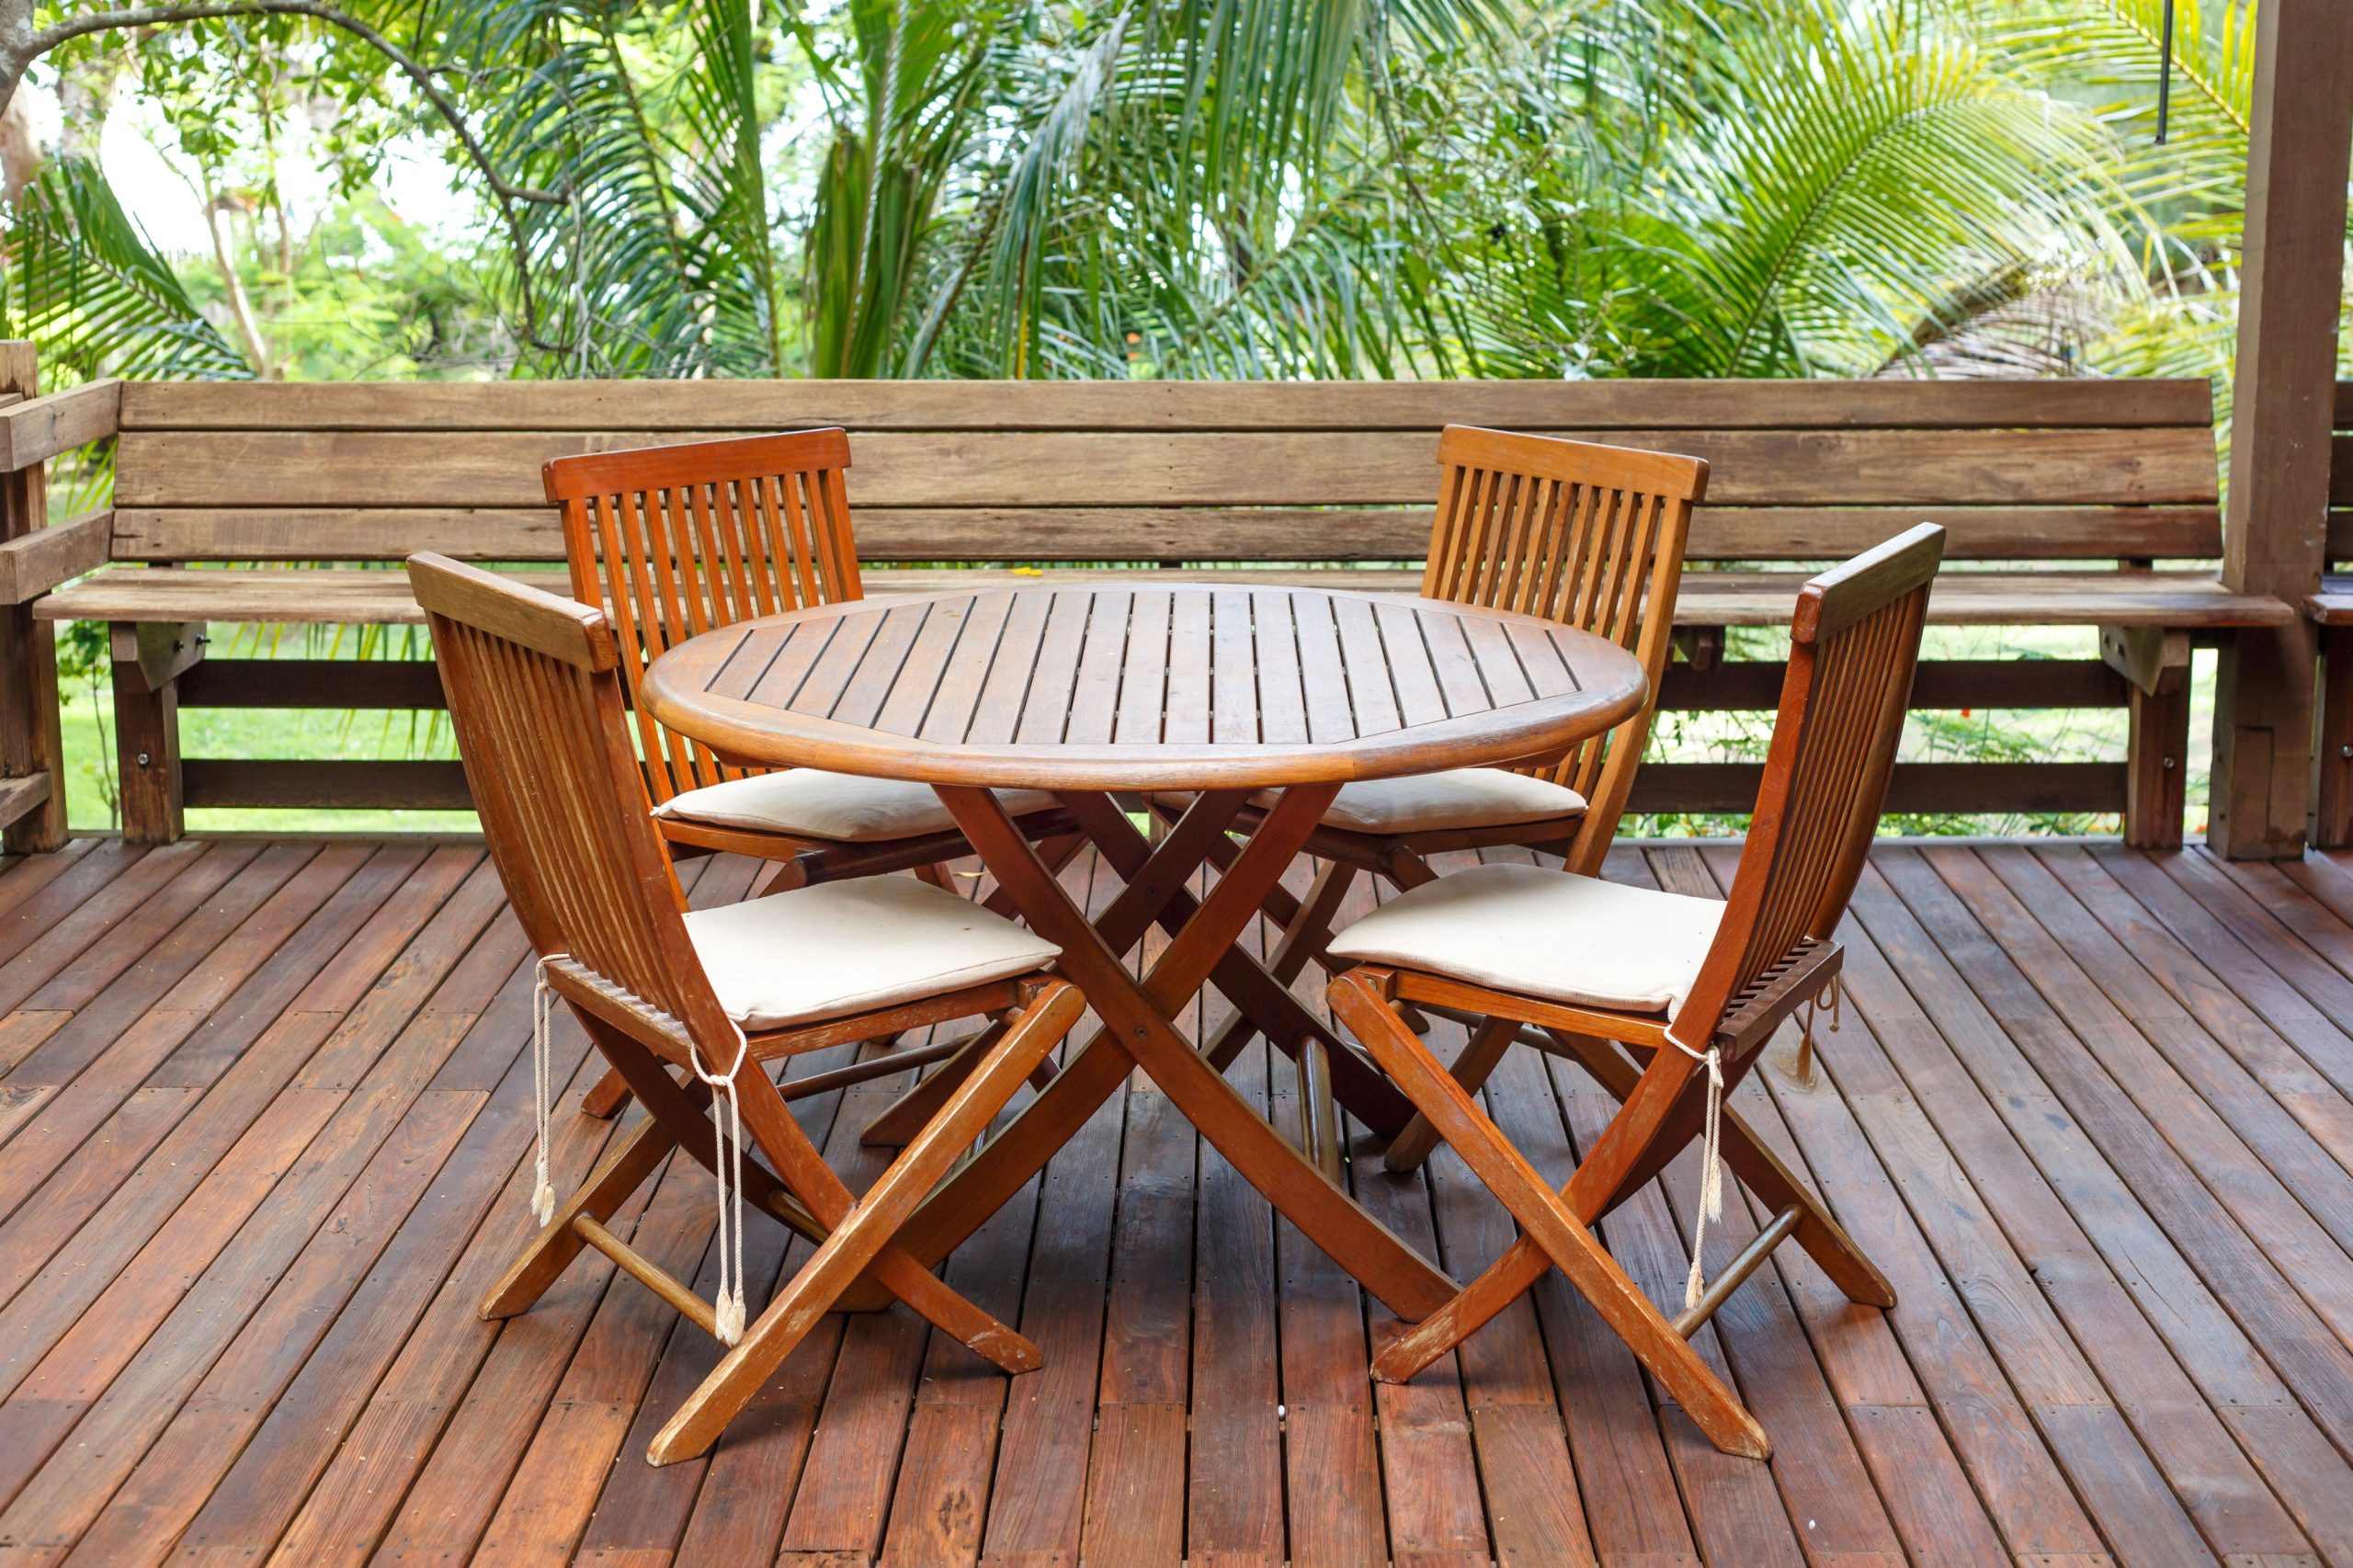 Discover the Beauty of Wooden Outdoor Furniture